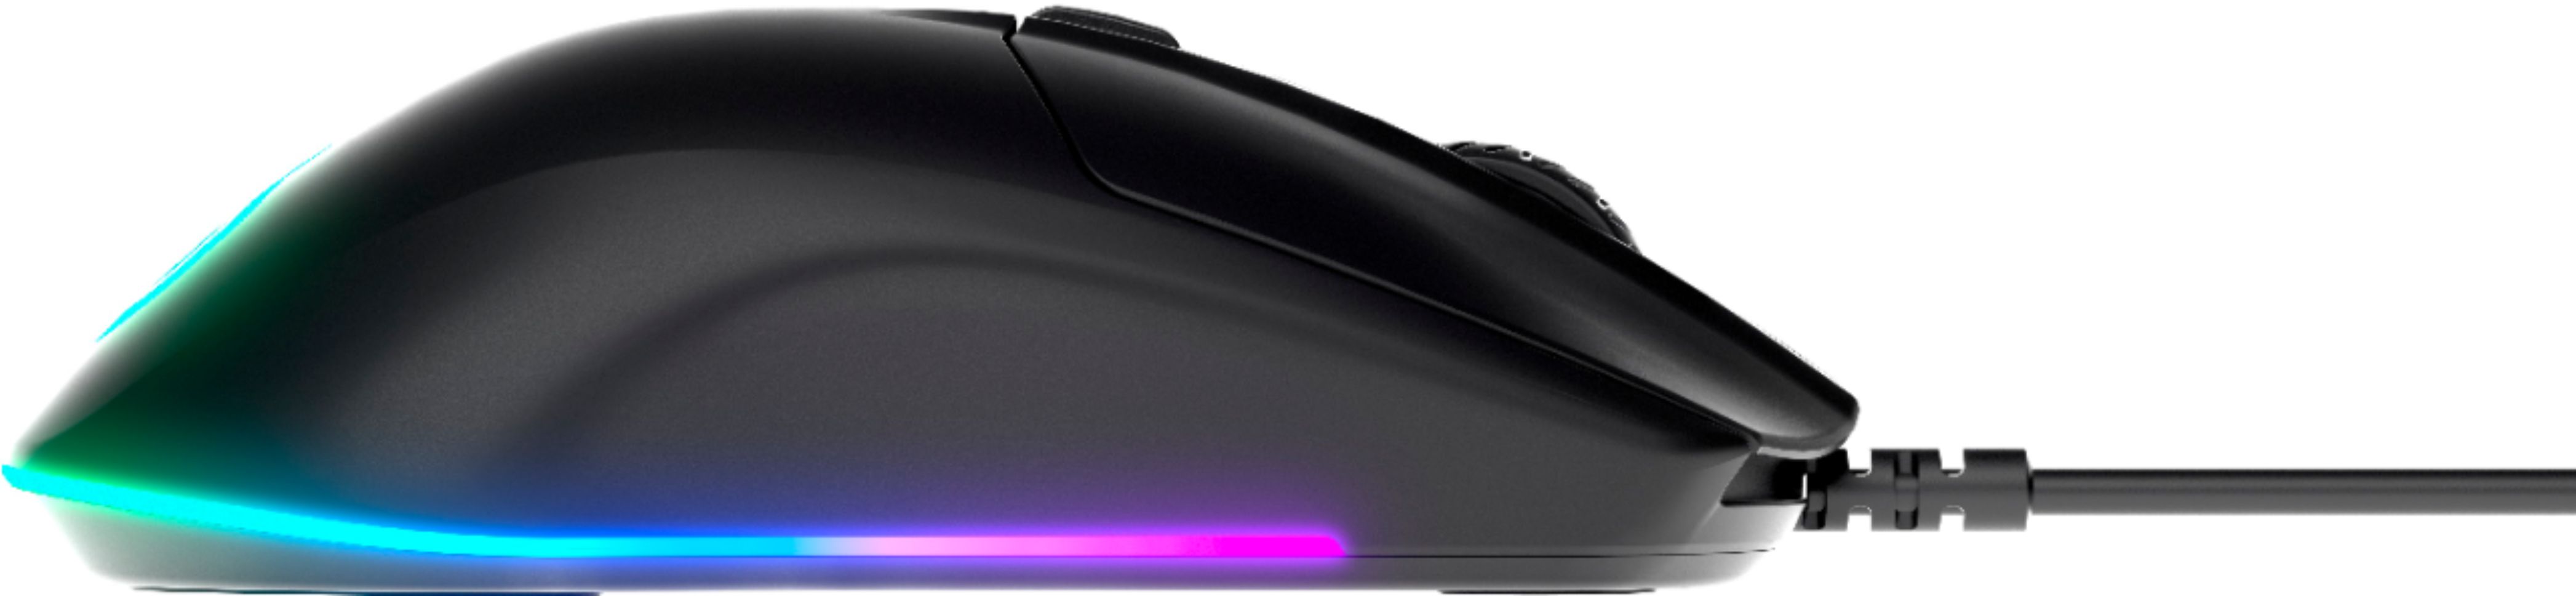 SteelSeries Rival 3 Gaming Mouse - 8,500 CPI TrueMove Core Optical Sensor -  6 Programmable Buttons - Split Trigger Buttons - Brilliant Prism RGB  Lighting 